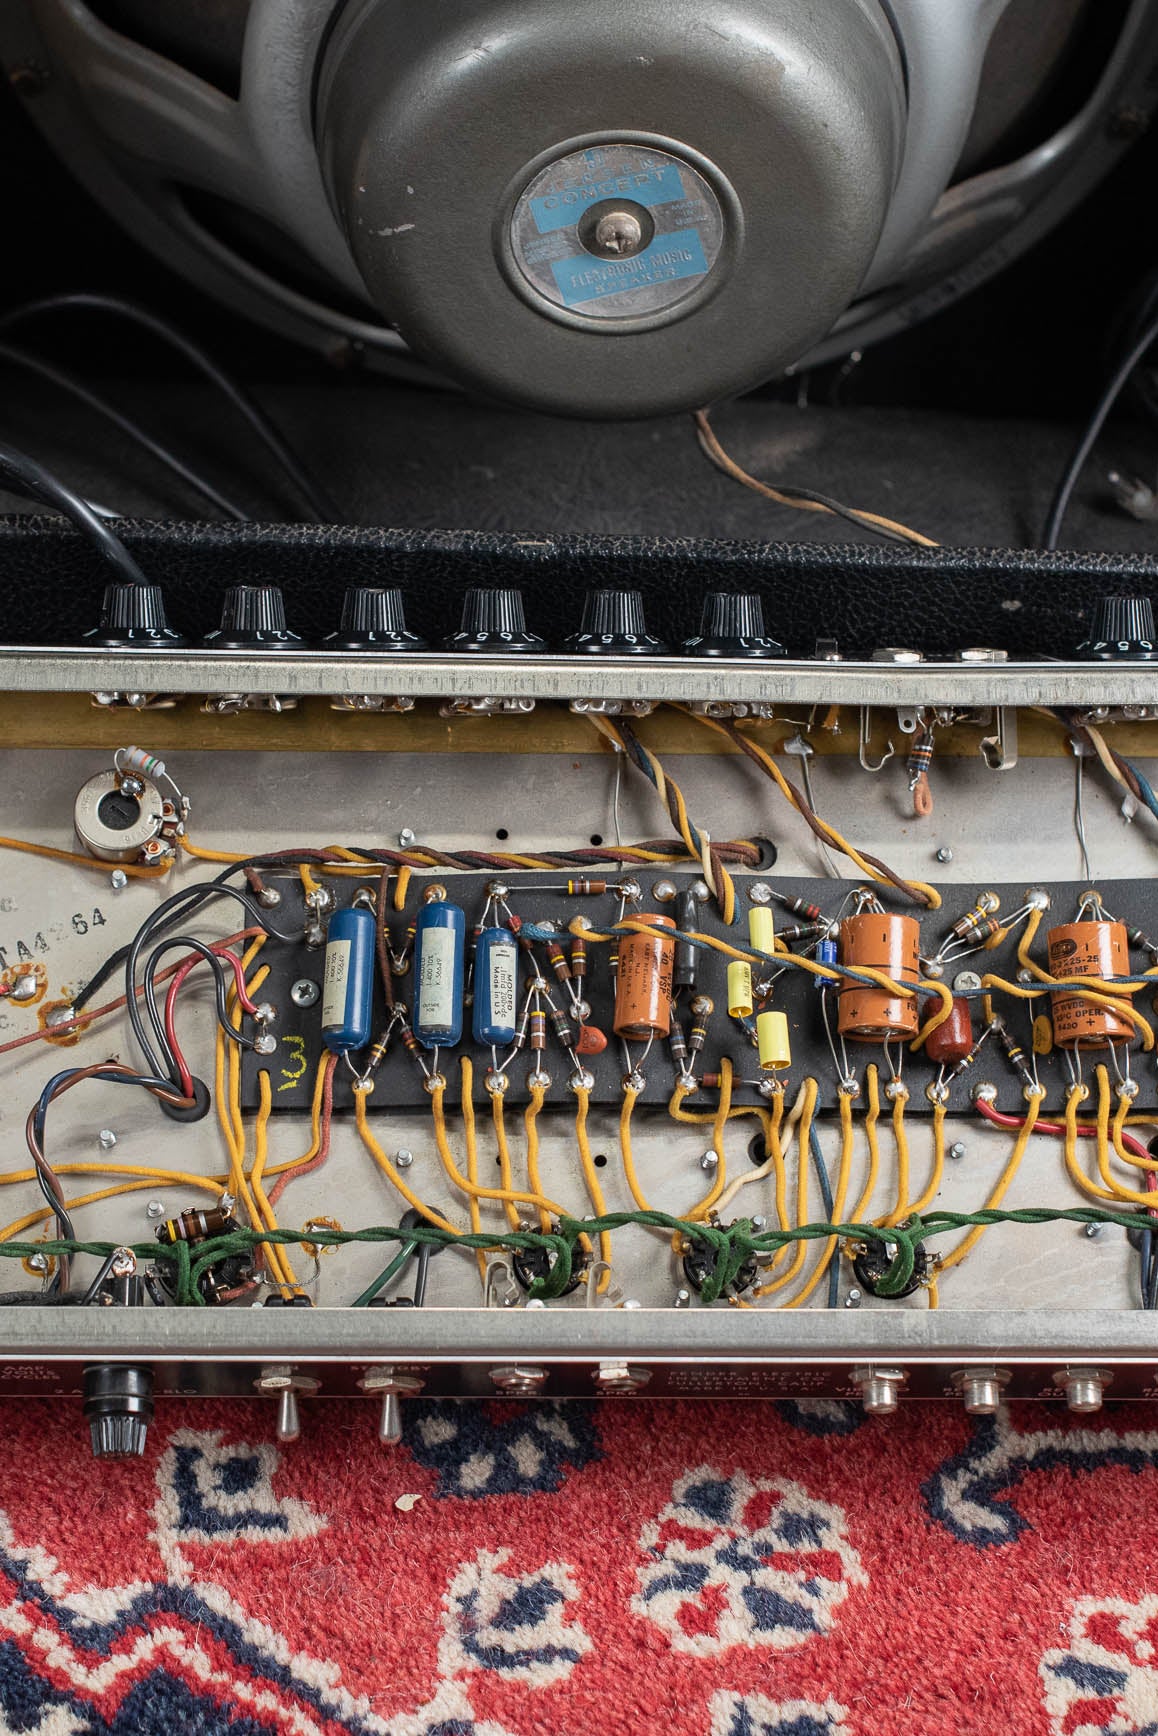 Vibroverb chassis, circuit, 1964